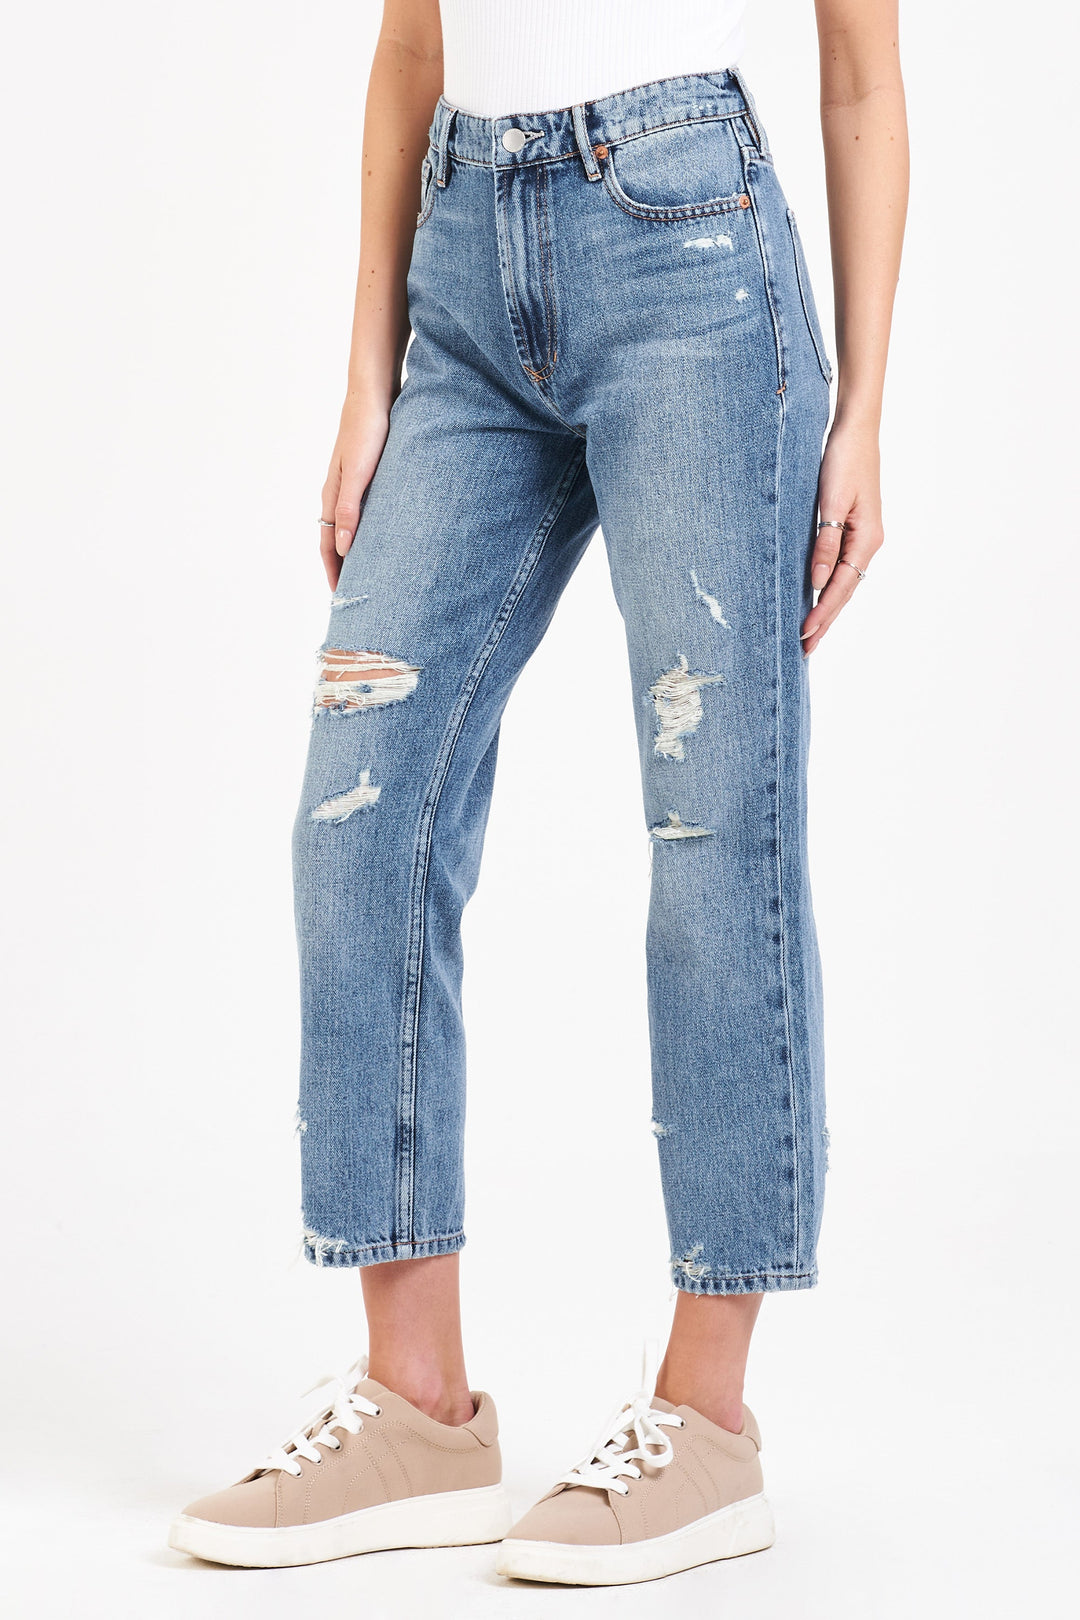 image of a female model wearing a JODI SUPER HIGH RISE CROPPED STRAIGHT LEG JEANS ELM GROVE JEANS